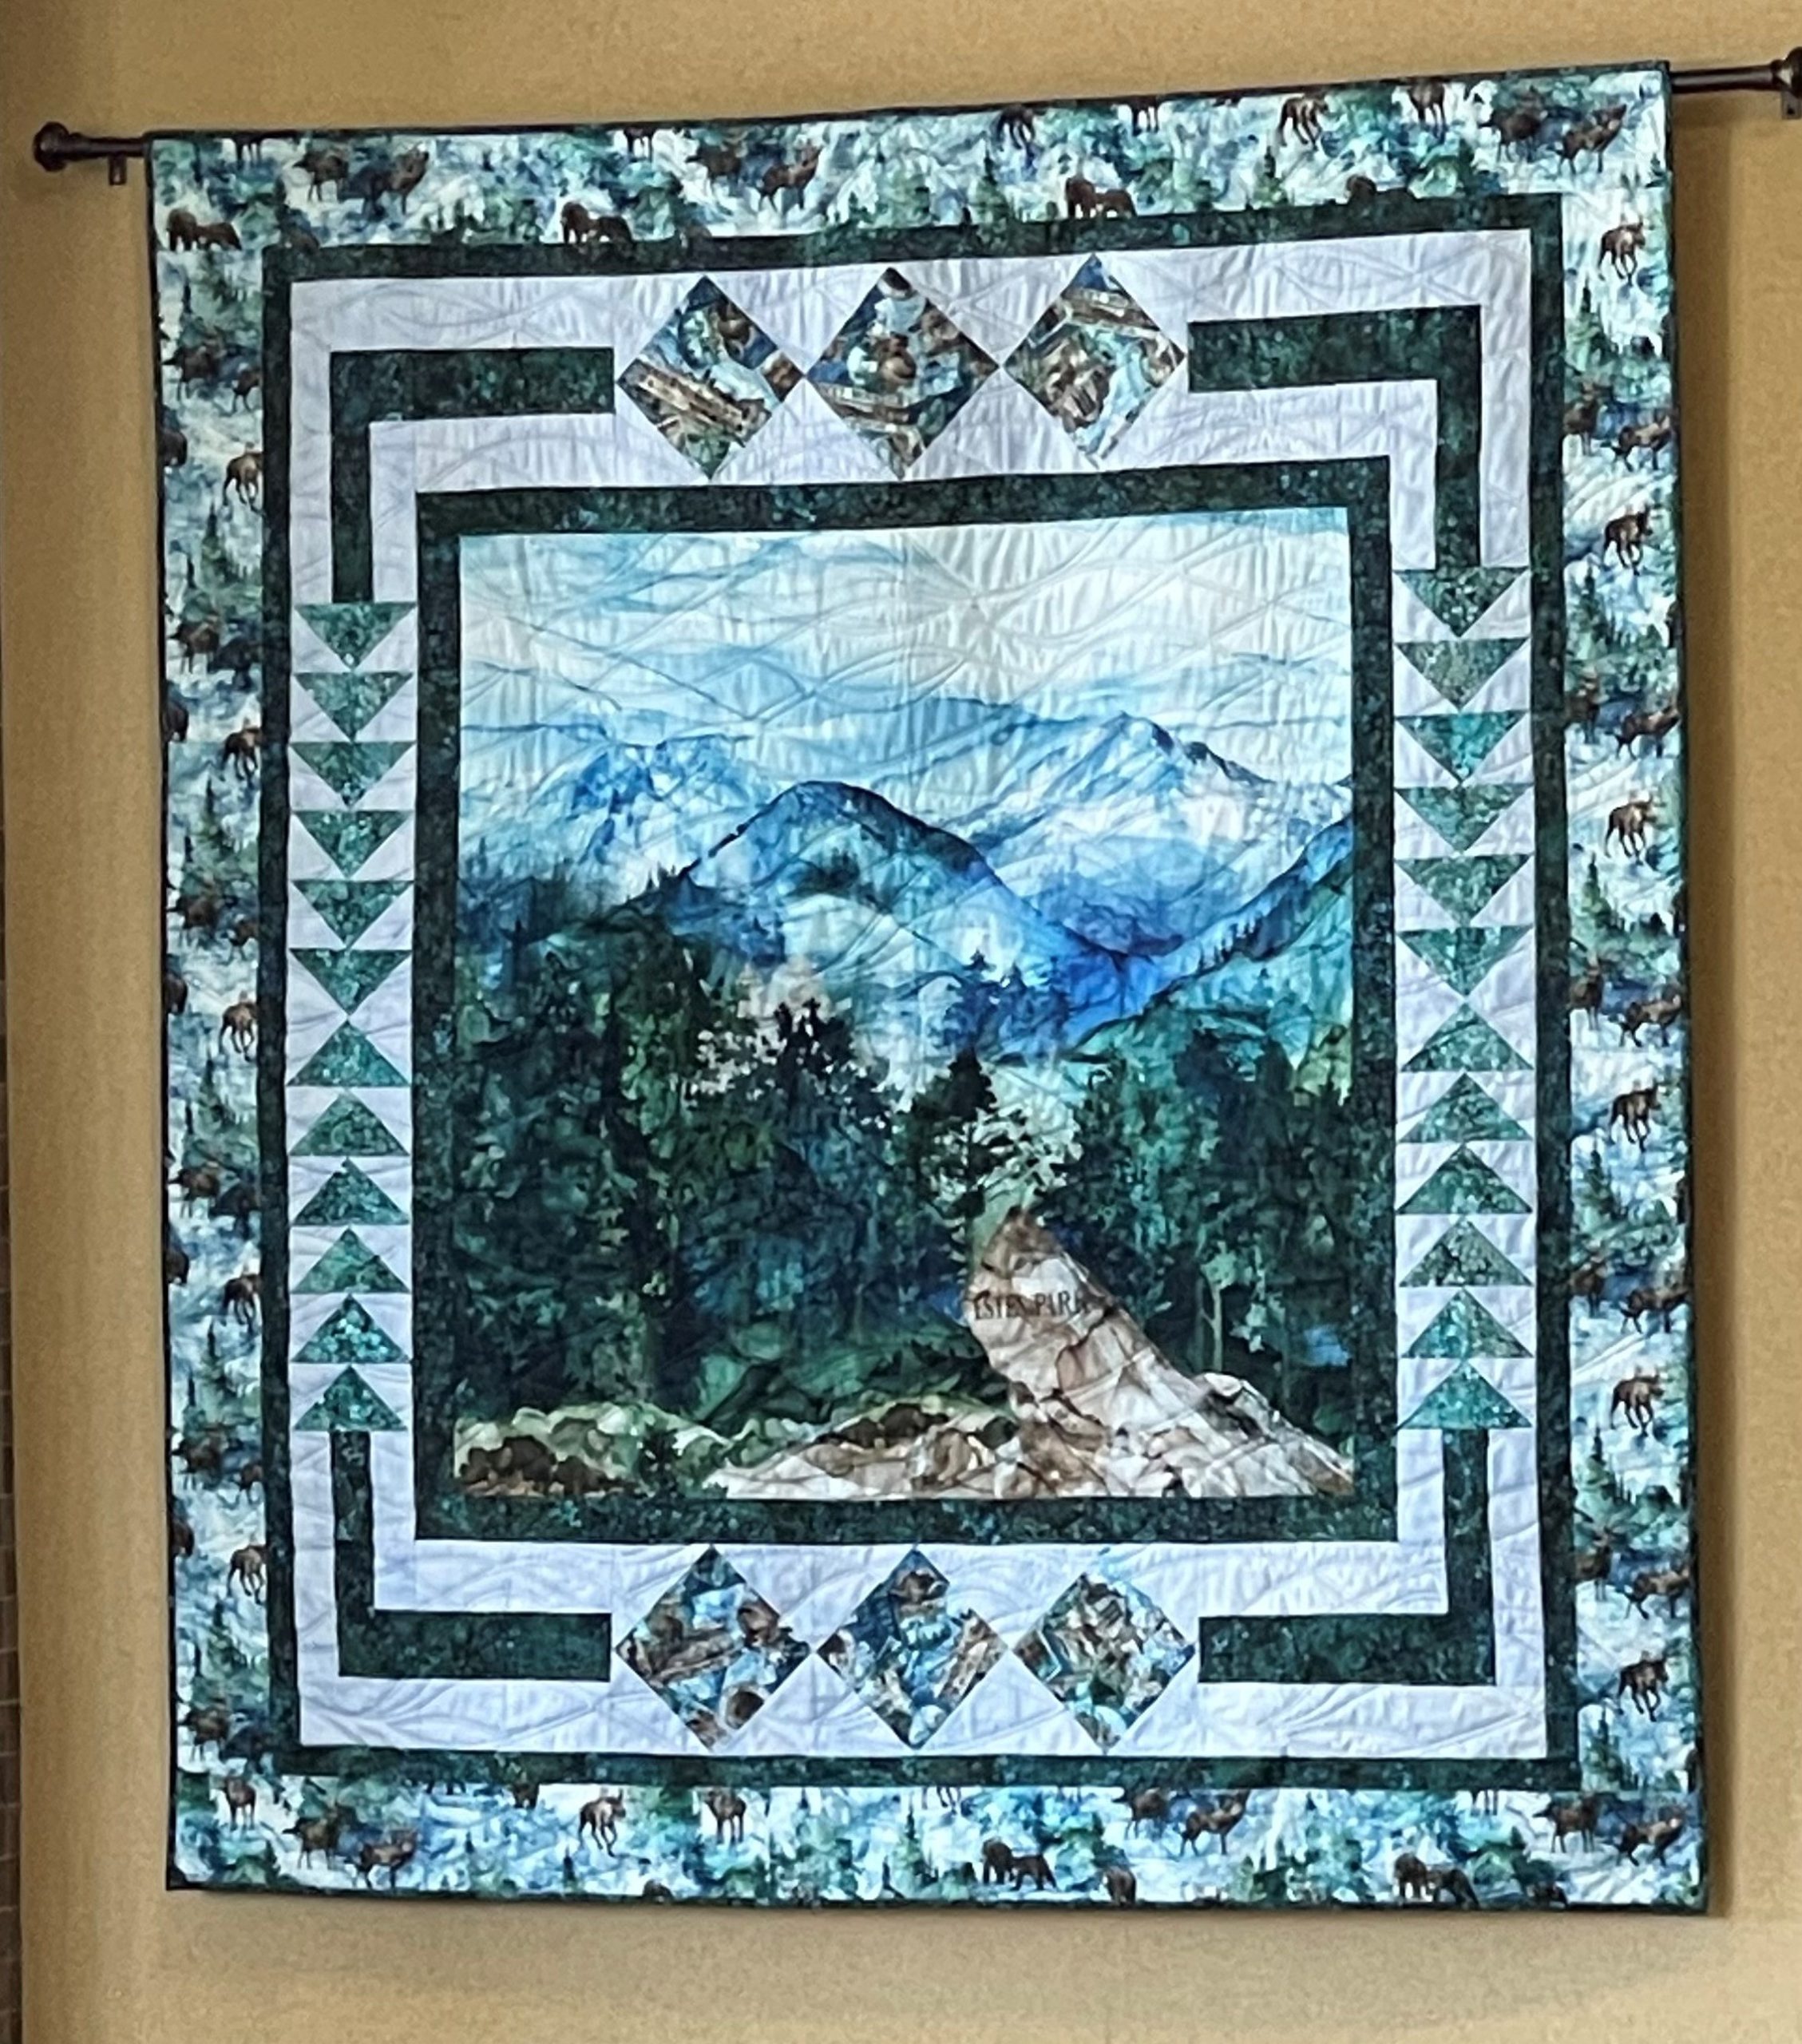 A wall-hanging quilt featuring a central scenic mountain and forest motif, surrounded by geometric border patterns in shades of blue, green, and white.